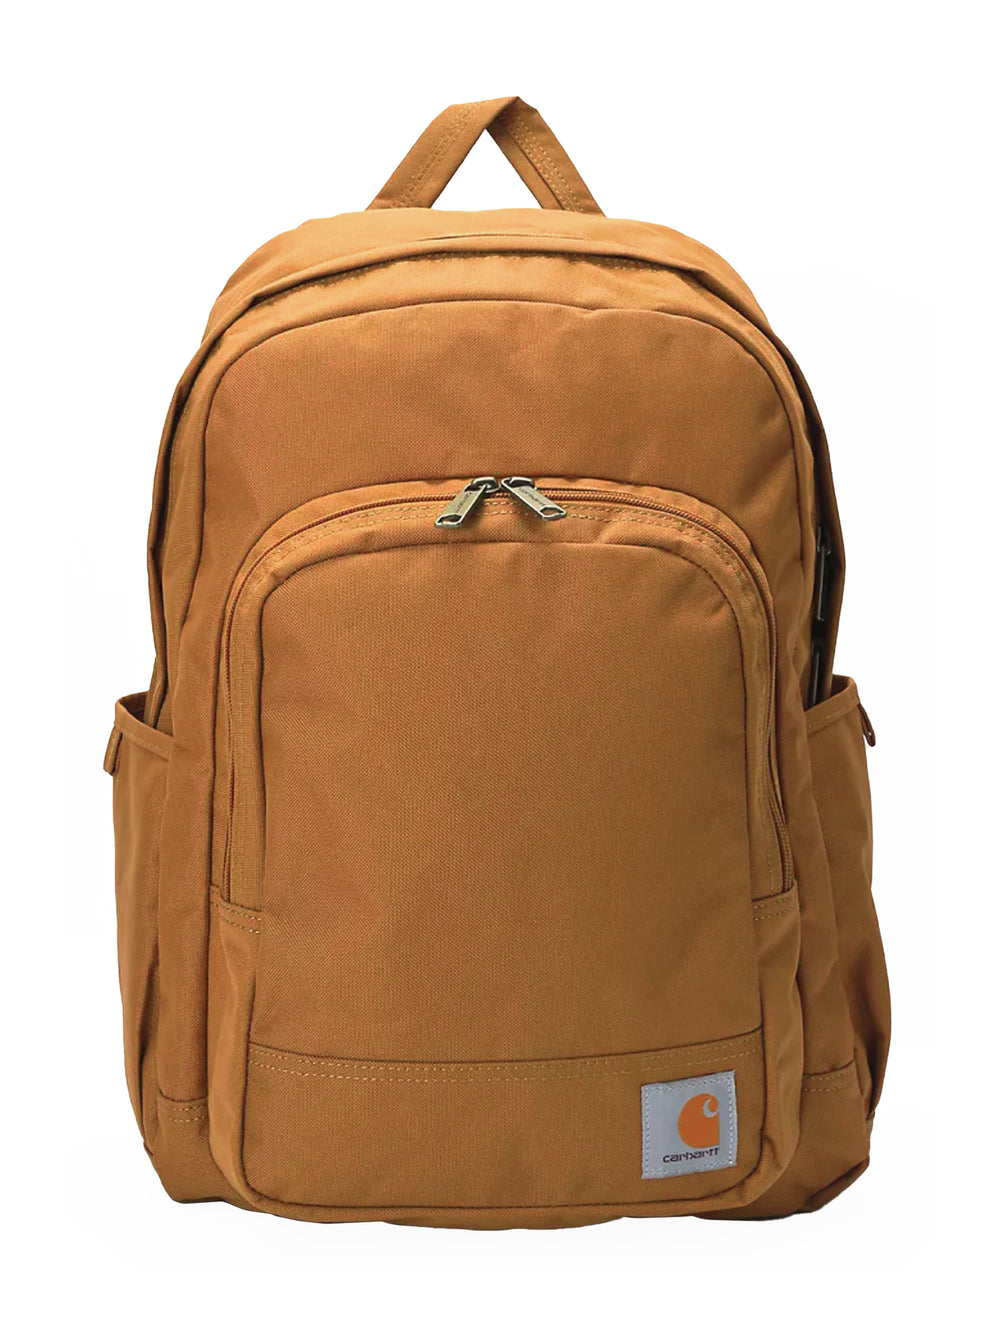 CARHARTT CLASSIC 25L LAPTOP BACKPACK - CLEARANCE